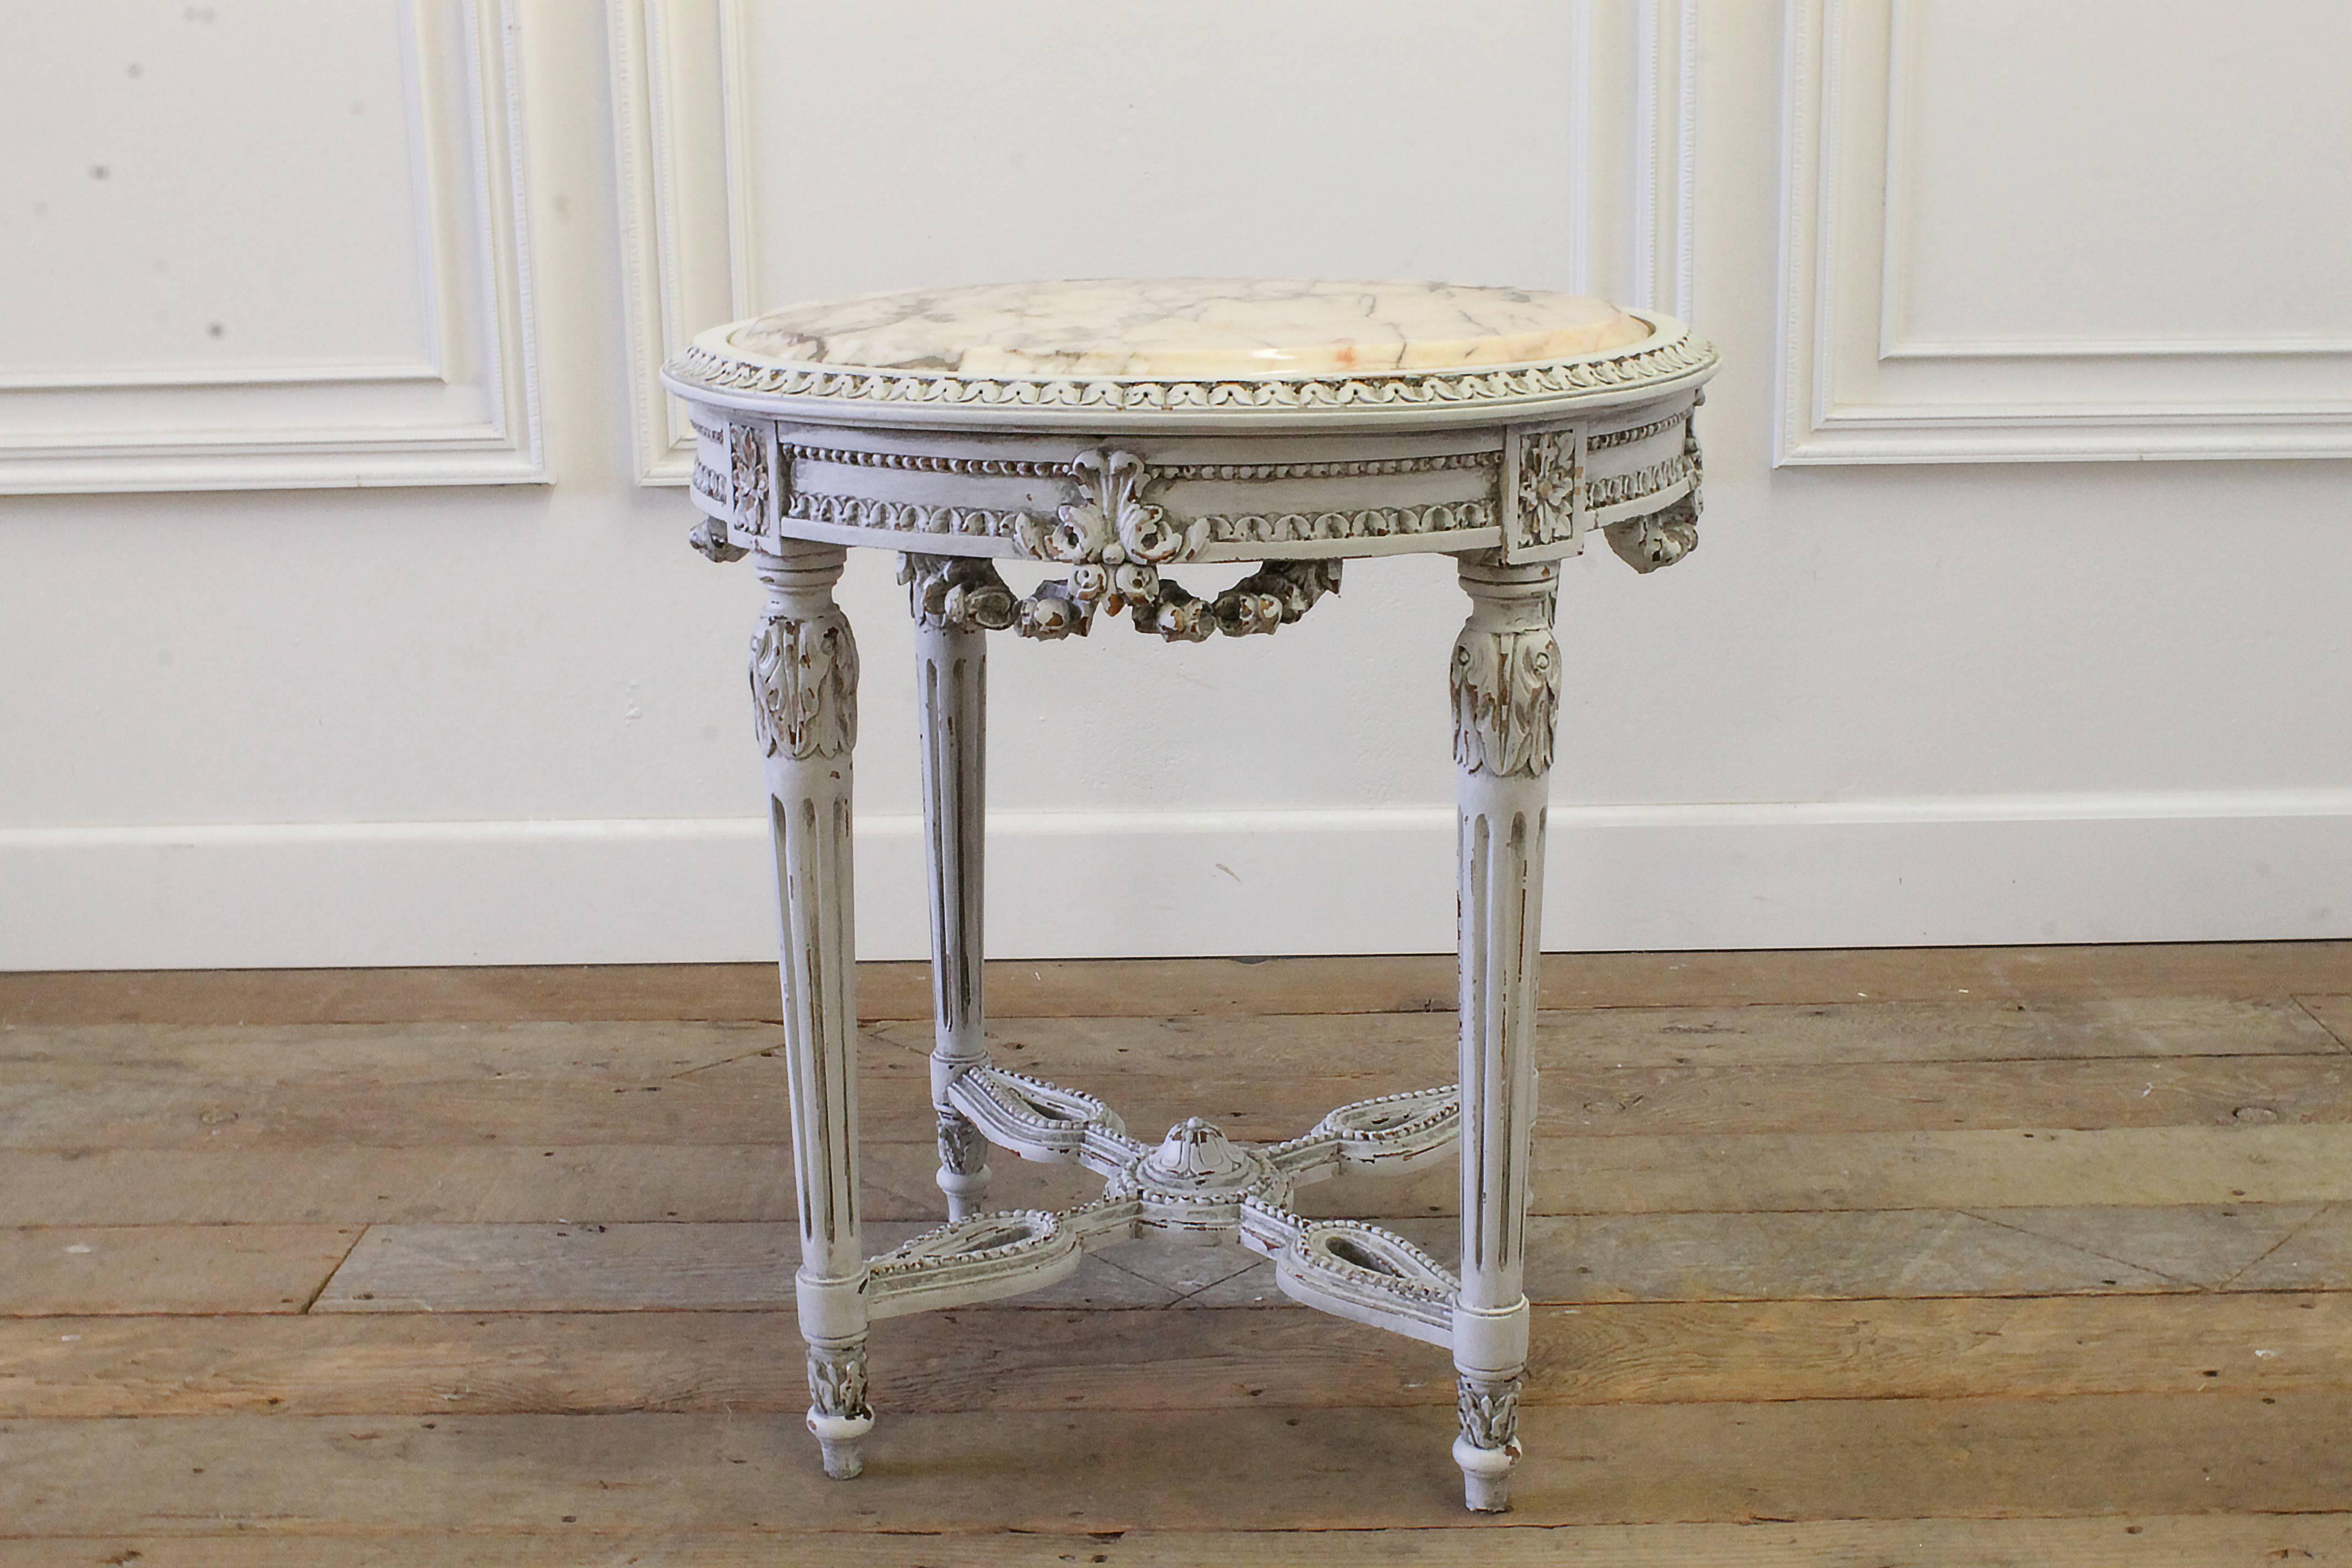 Beautiful antique table in the Louis XVI style, has a creamy and soft pink marble top, with rust colored veins. Marble looks to be original and may have a petite flaw here or there.
Measures: 26